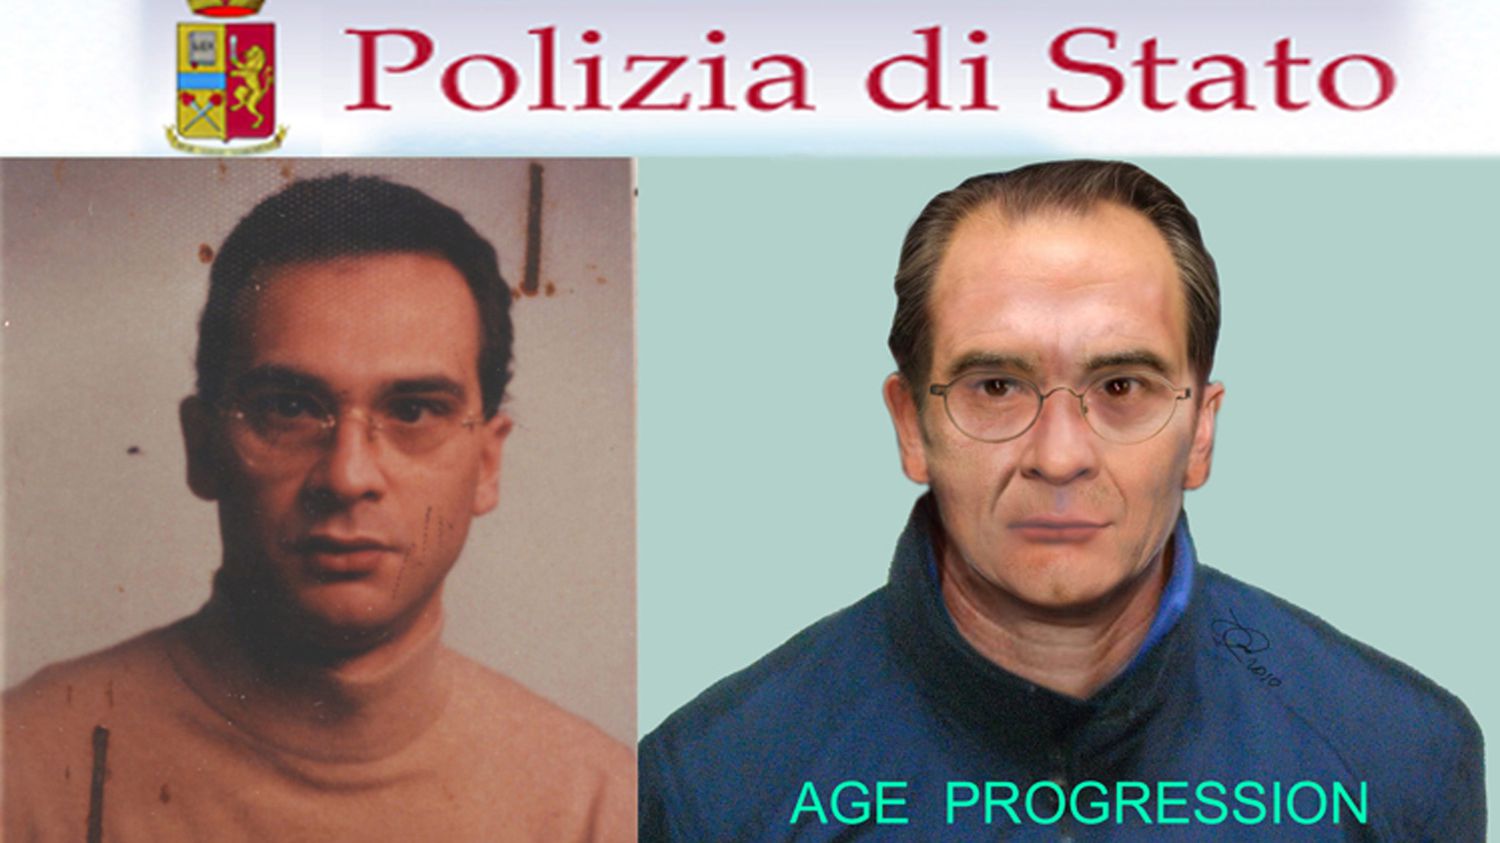 Italy: Matteo Messina Denaro, the most wanted mobster in the country, was arrested after 30 years on the run
